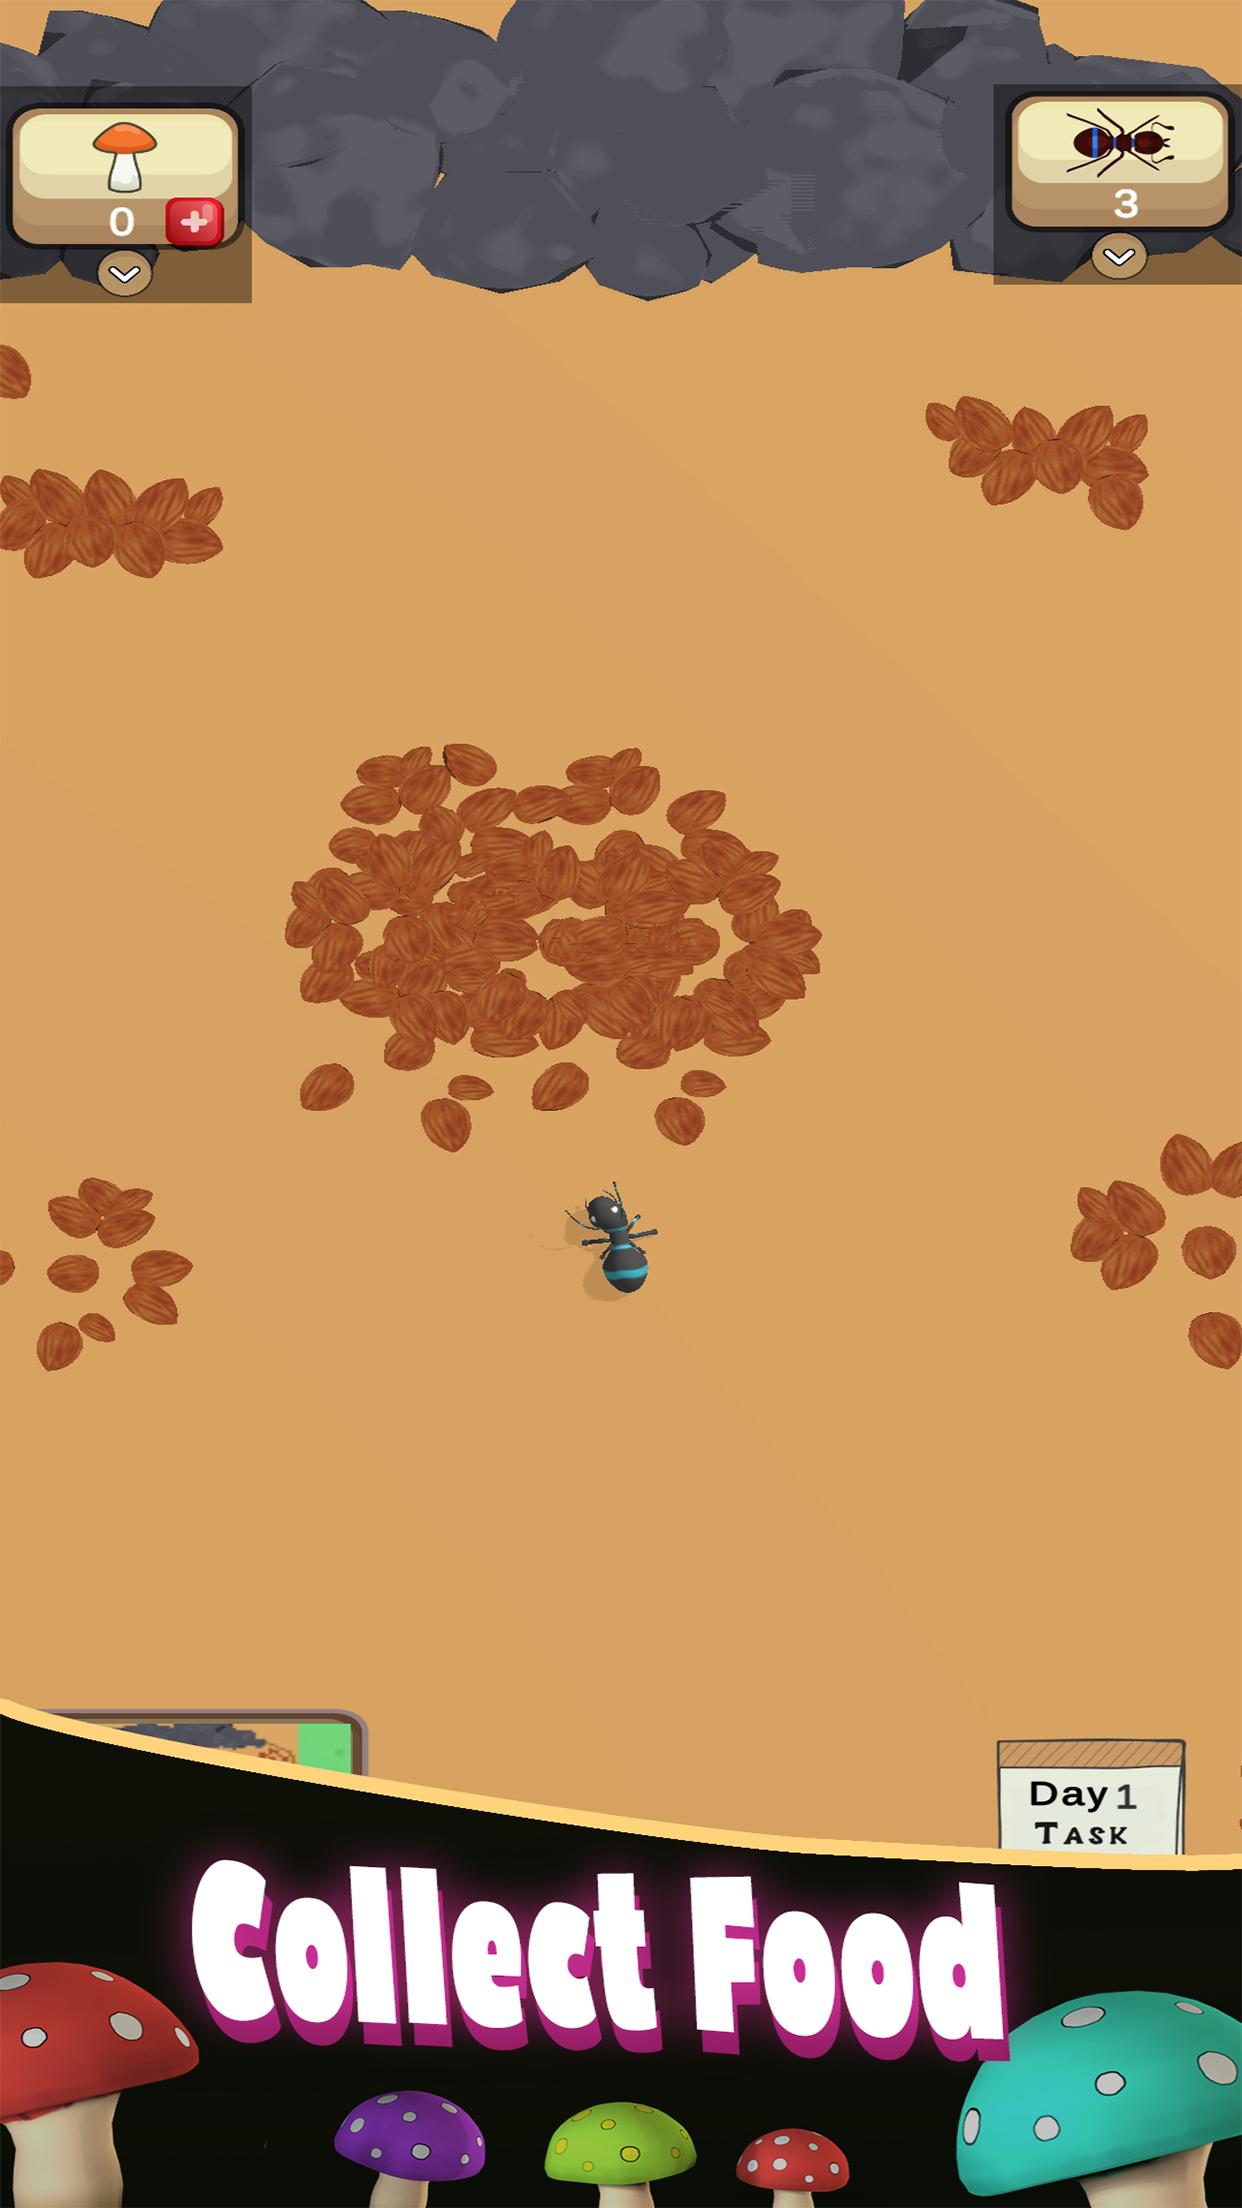 Ant Colony 3D: The Anthill Simulator Idle Games 2.7 Screenshot 4